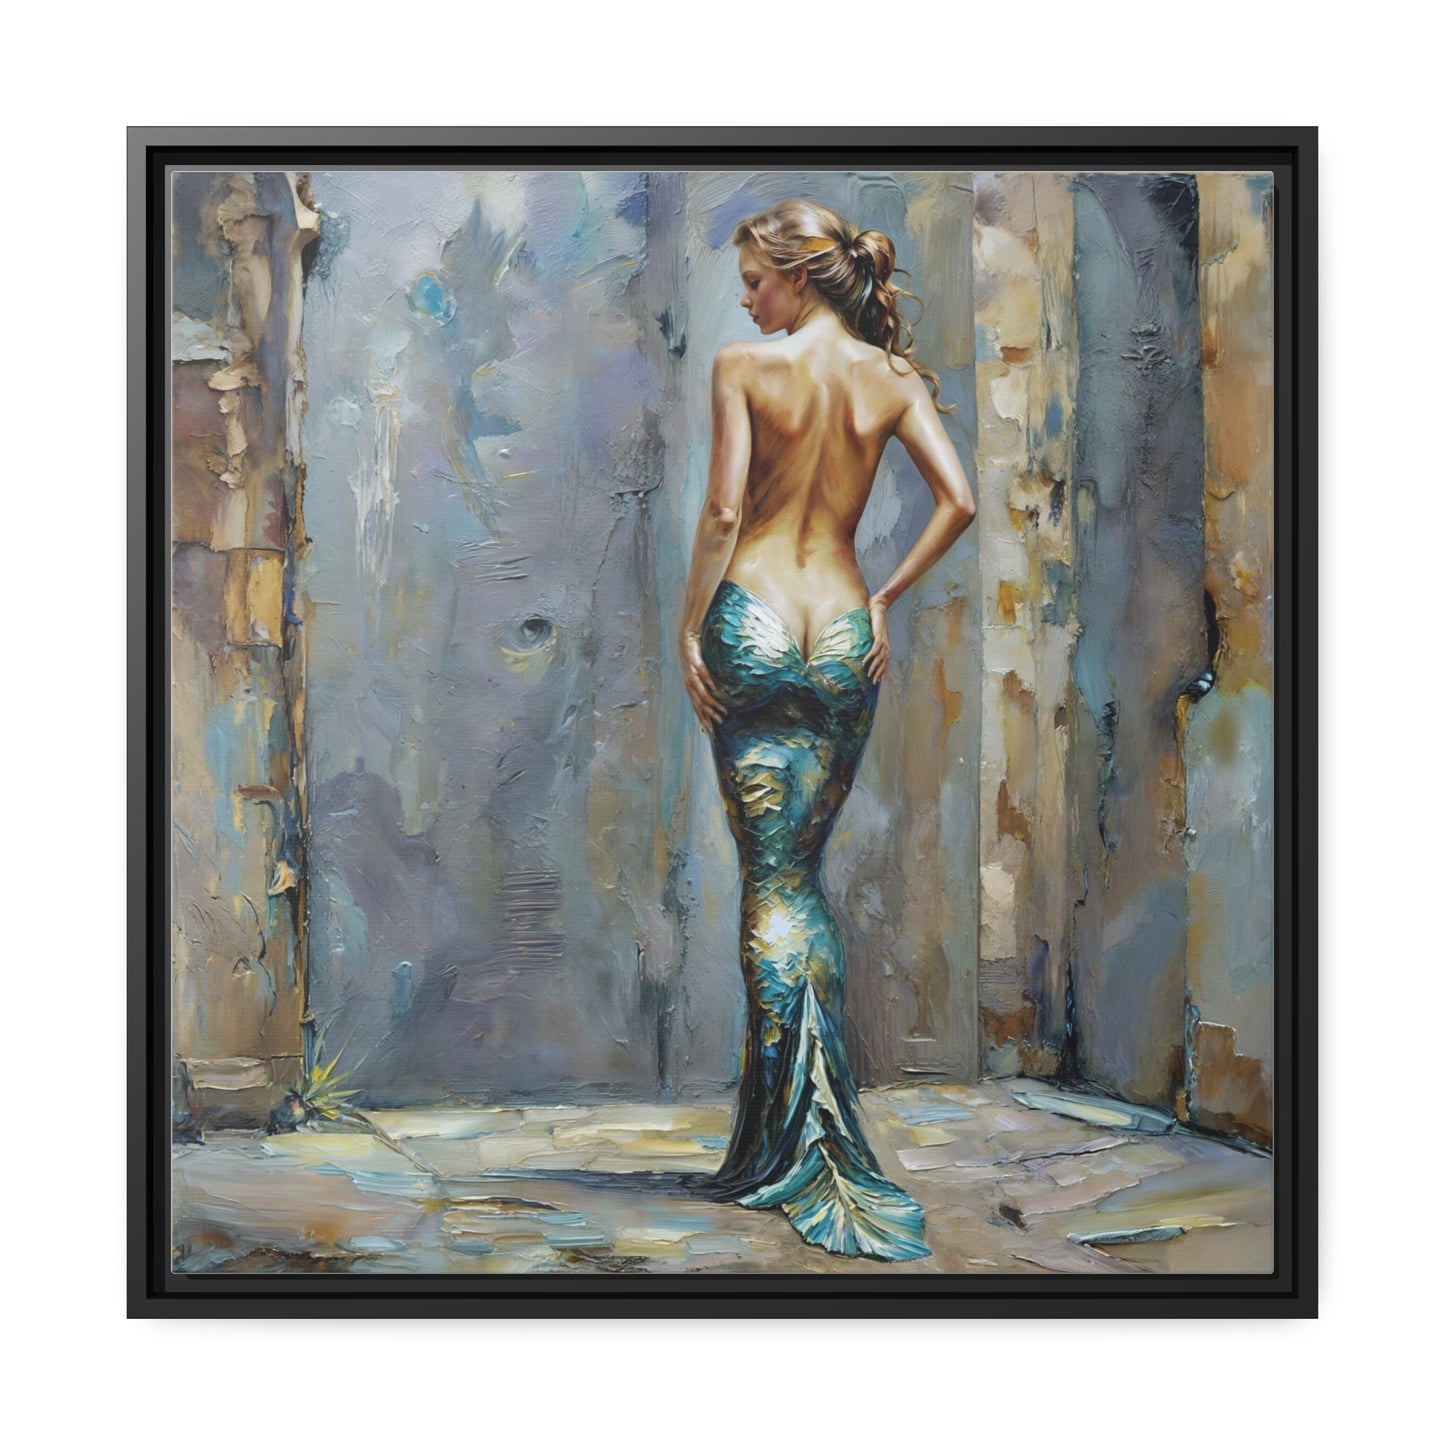 Mystique of the Urban Mermaid, Contemporary Mermaid Art Print, Enigmatic Siren of the Streets Canvas, Modern Mythical Beauty Wall Art